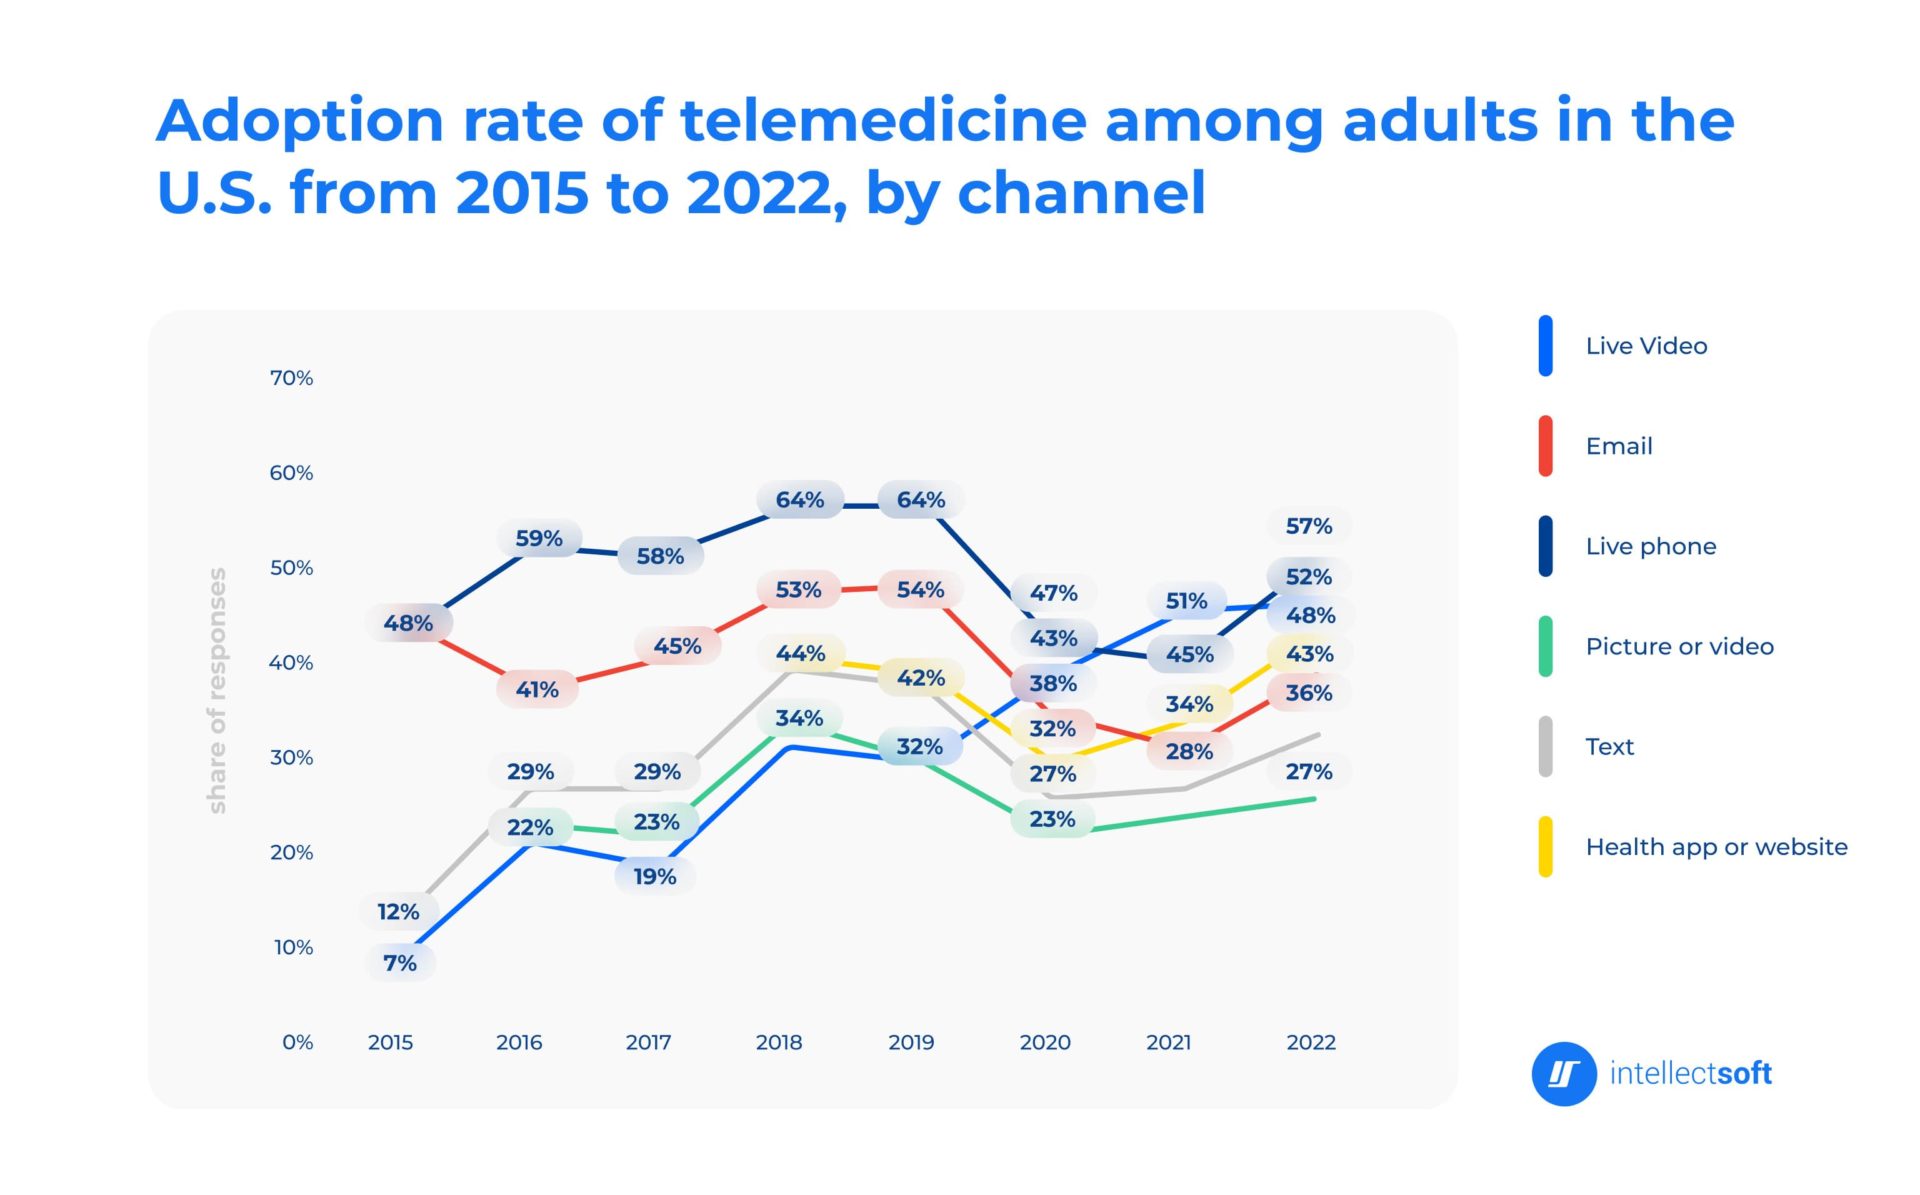 Schedule of the adoption rate of telemedicine among adults in the US